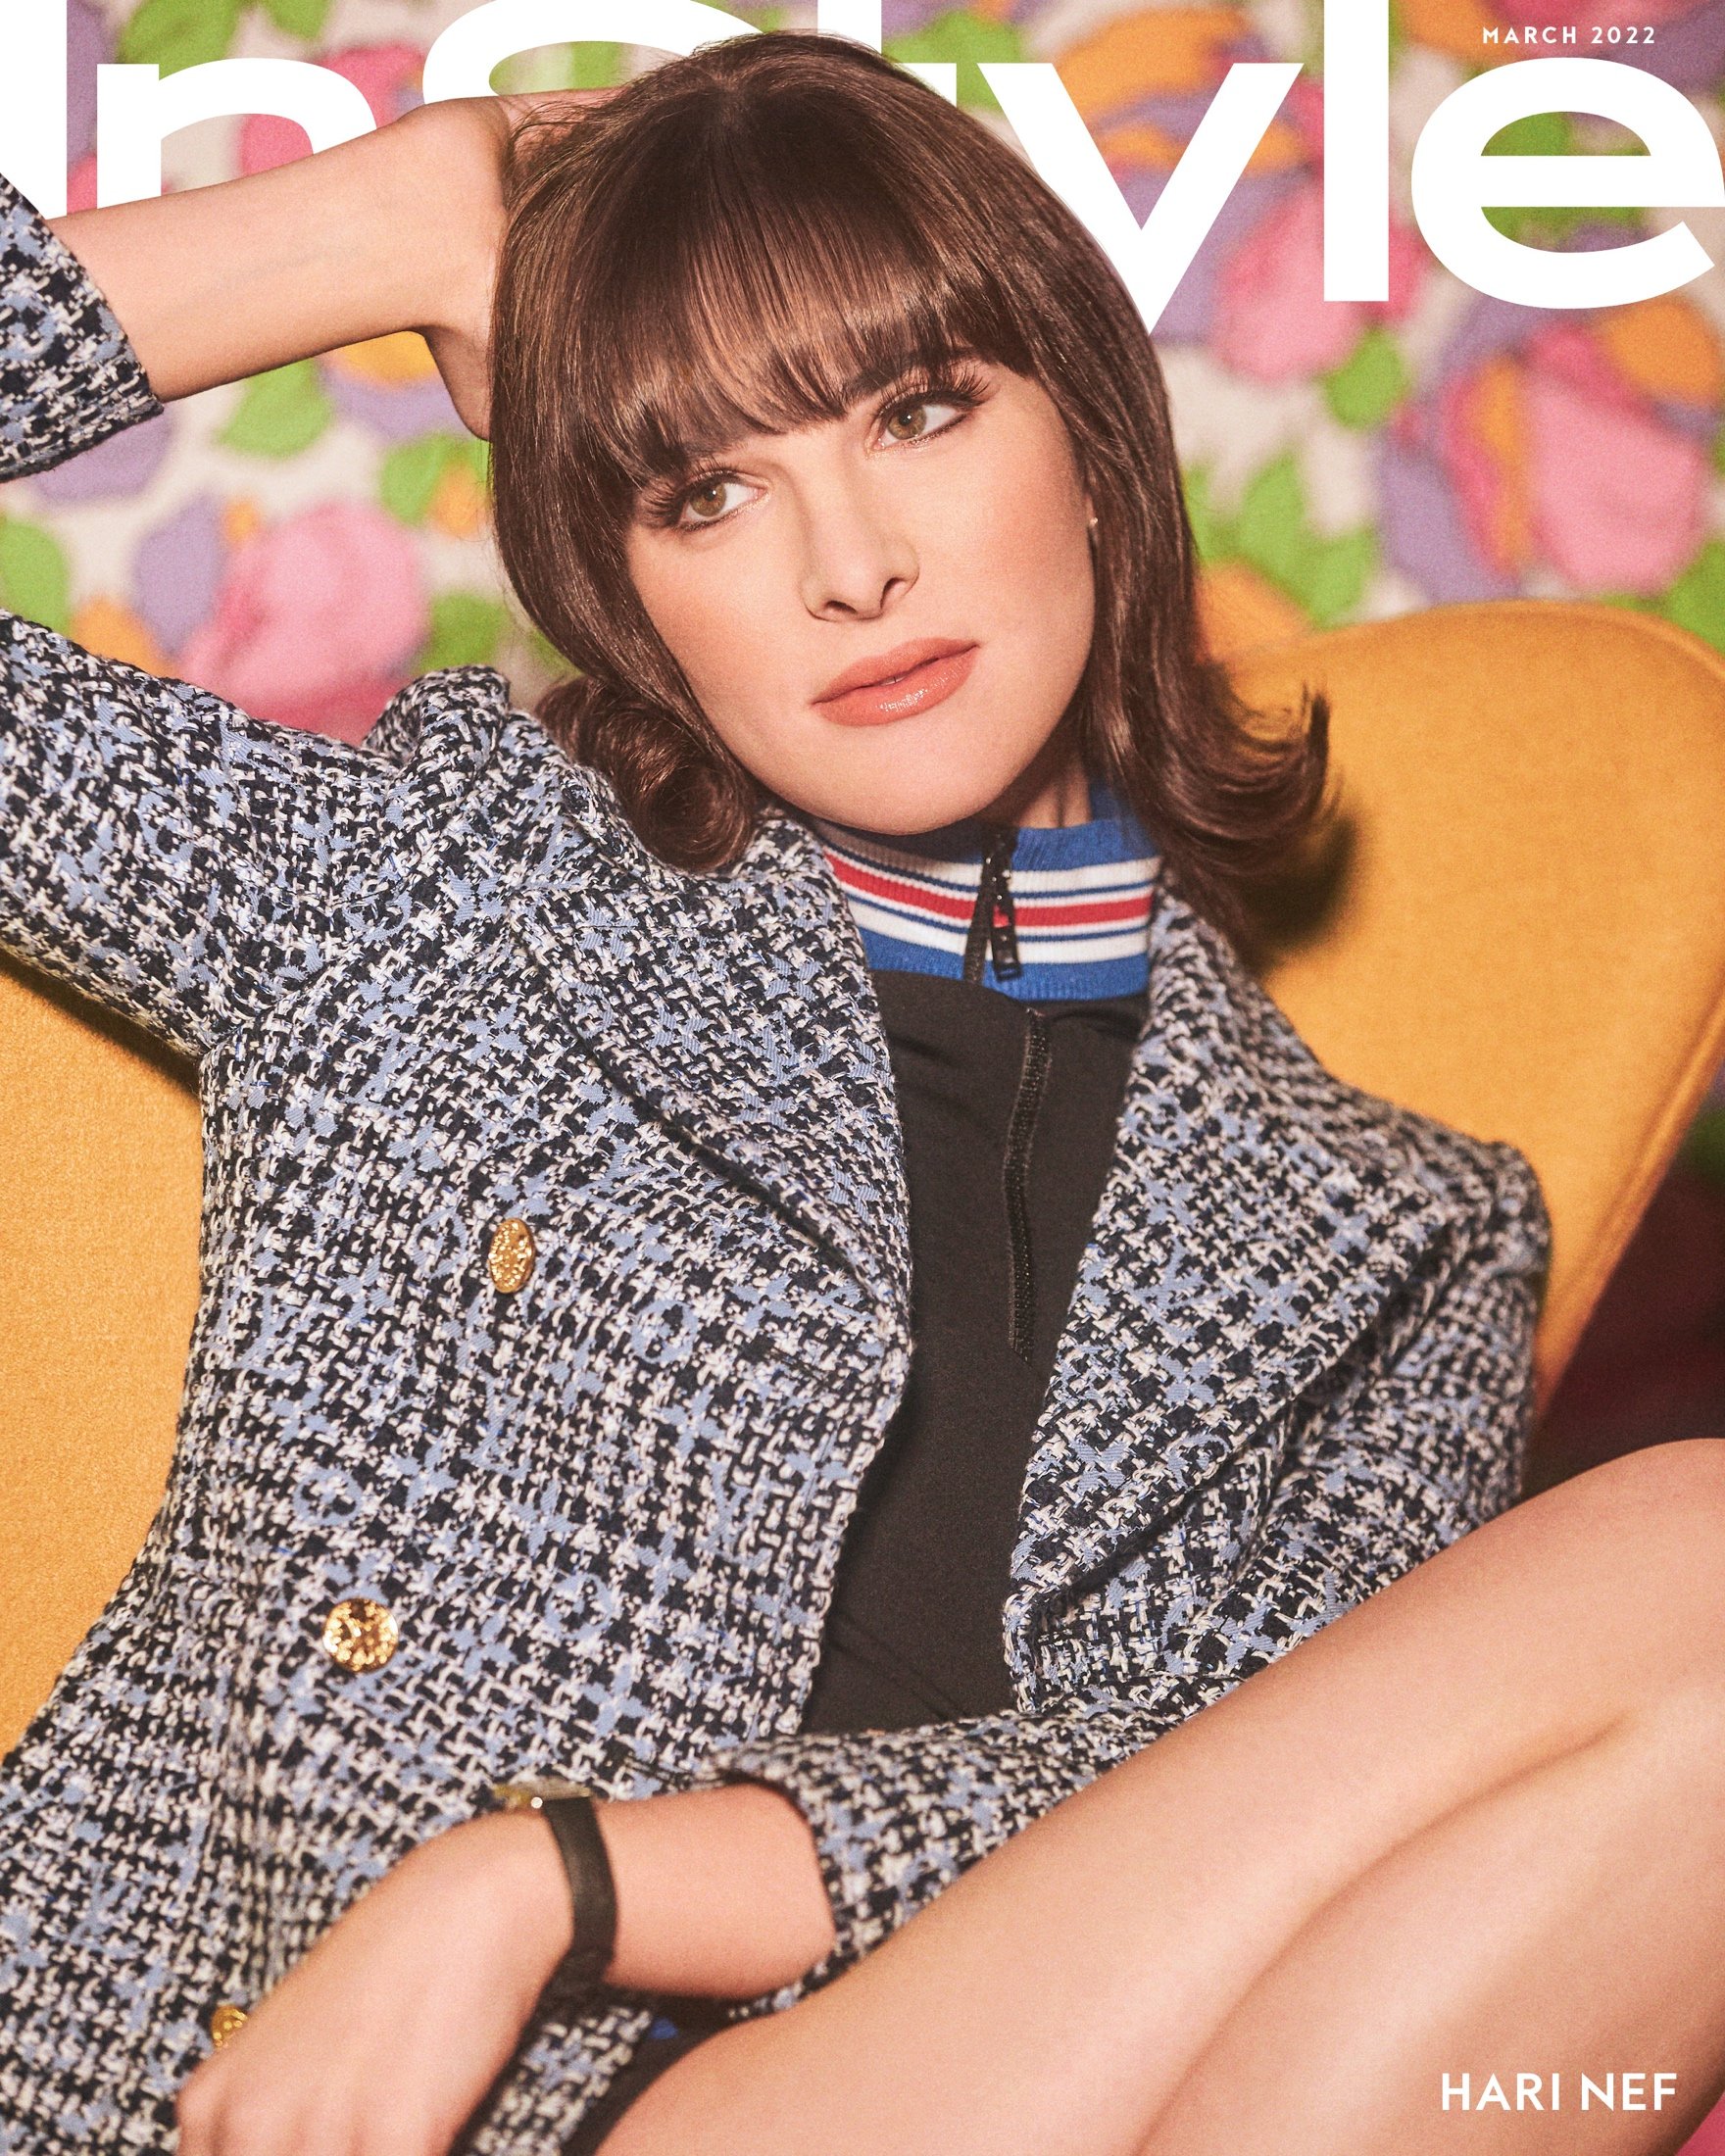 InStyle March 2022 Issue Sub Cover Ft. Hari Nef